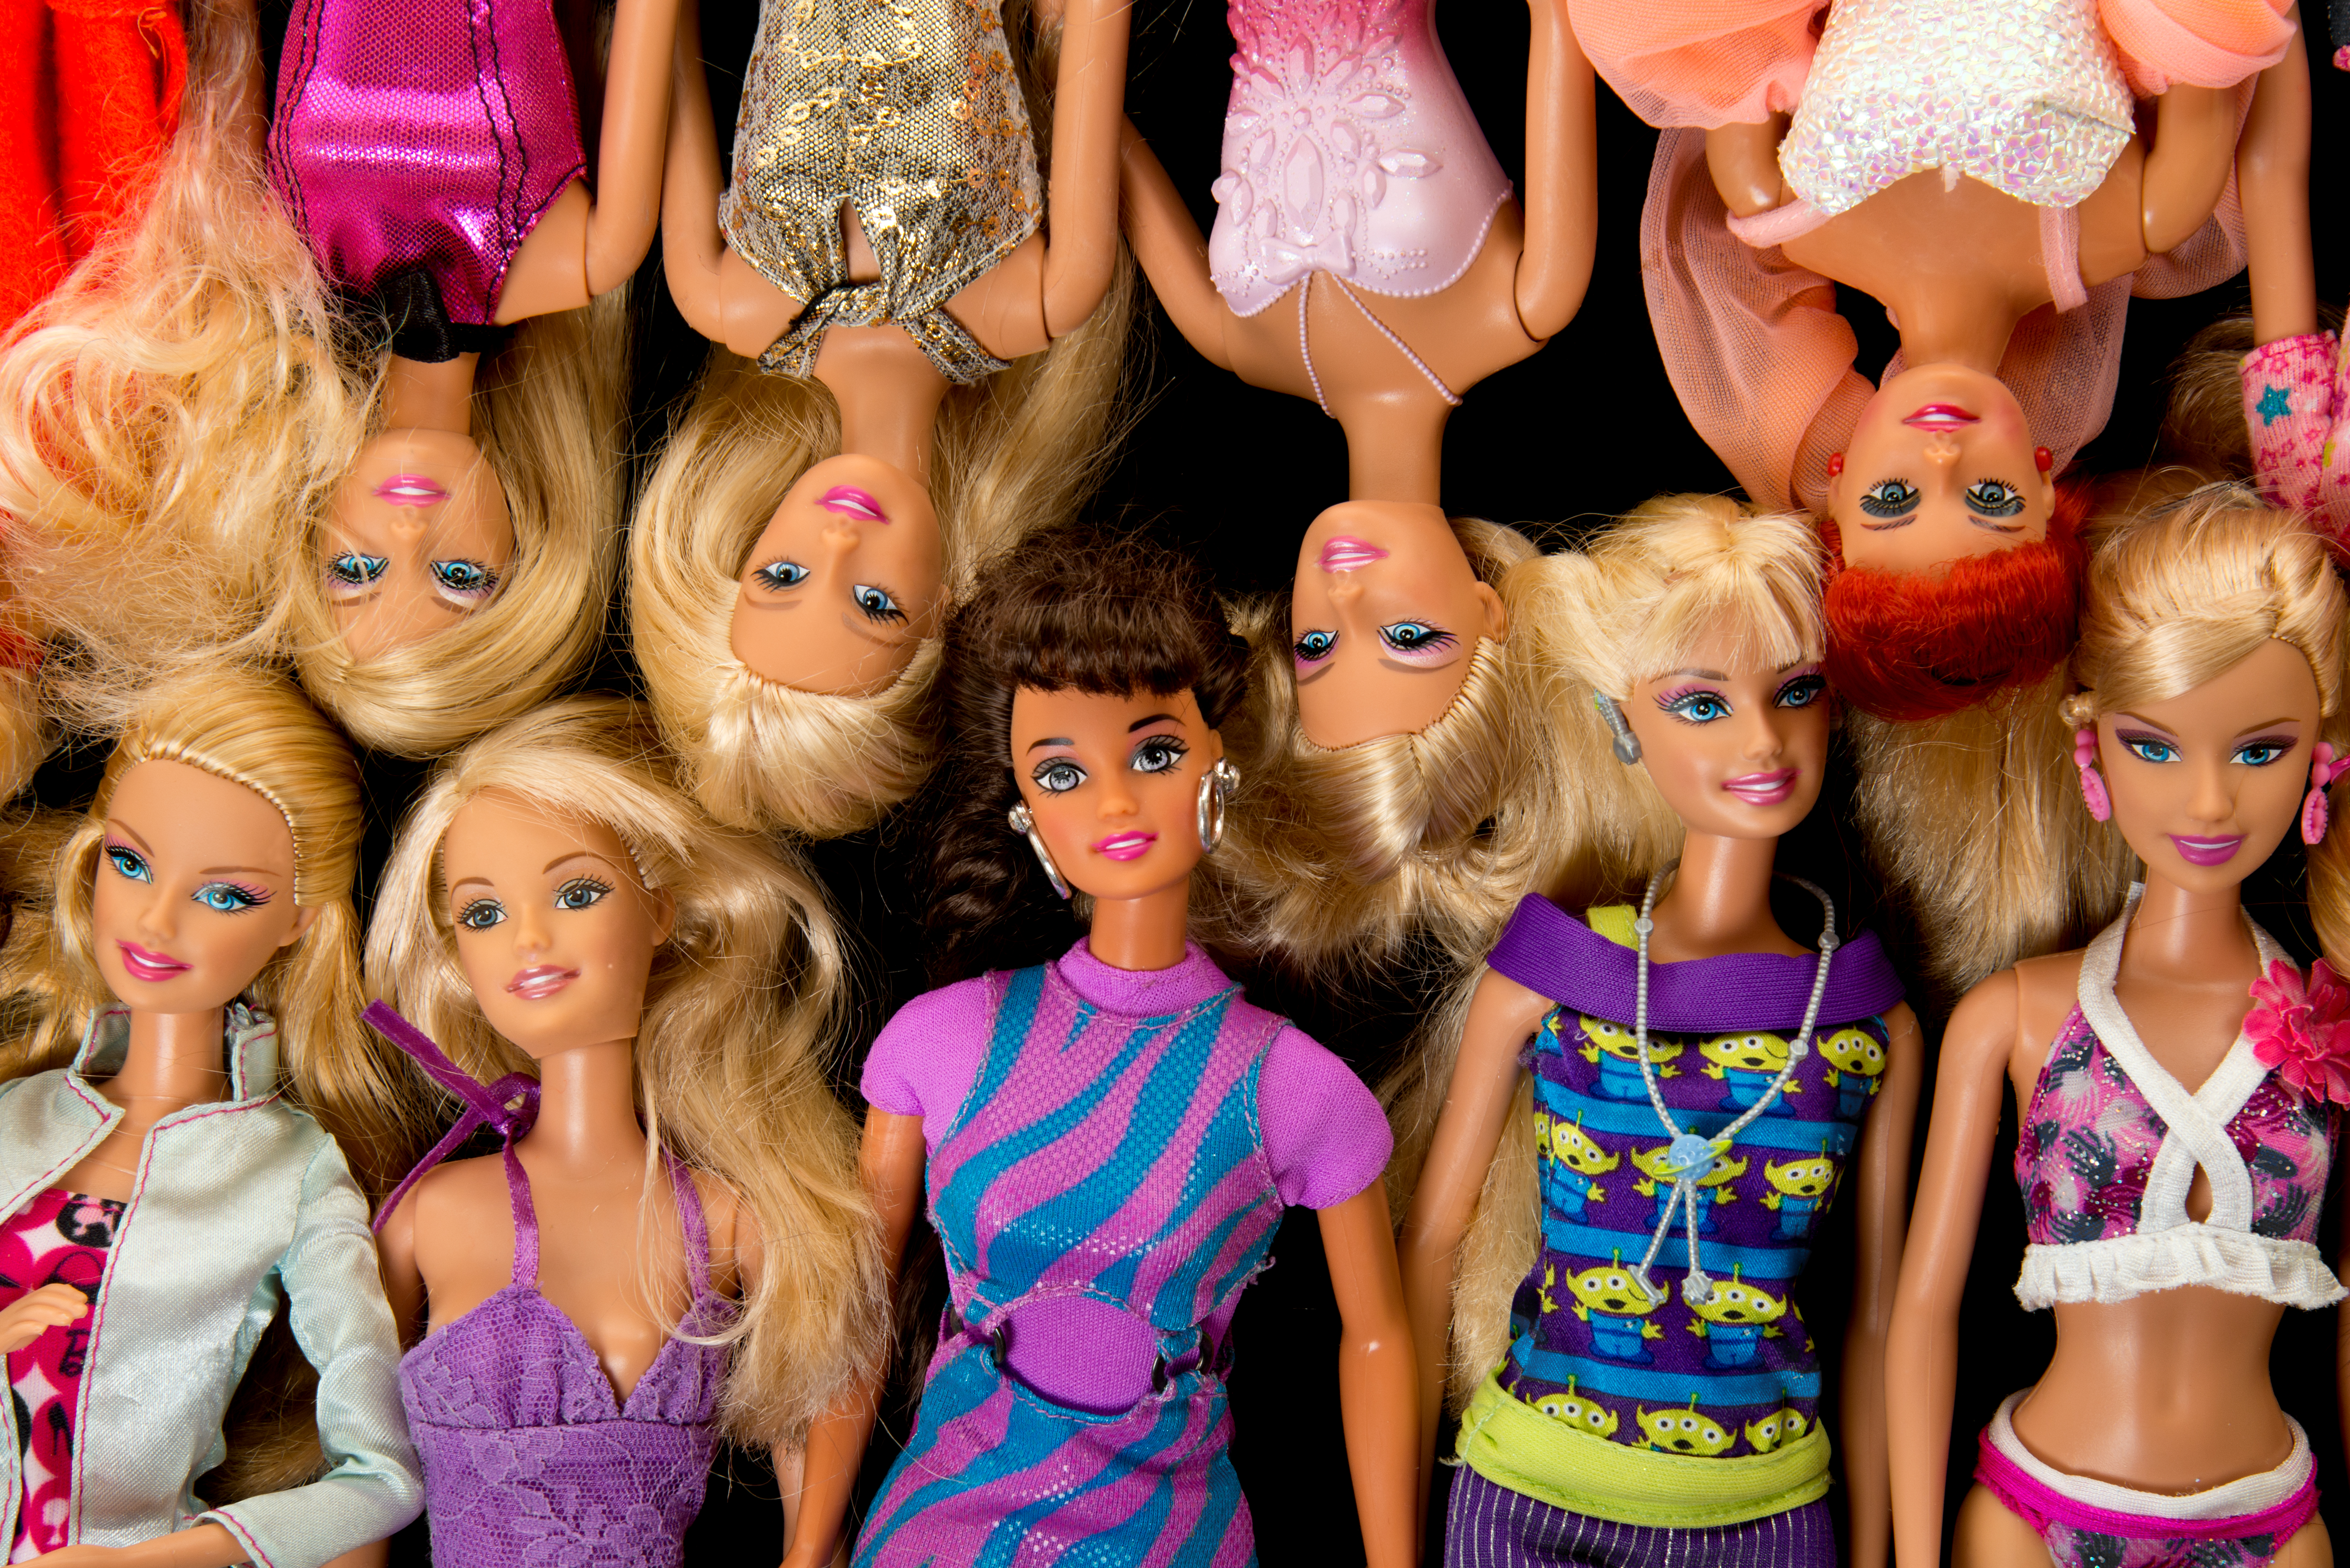 Judge Barbie: Where to Buy Barbie Dolls, Collectibles | Money